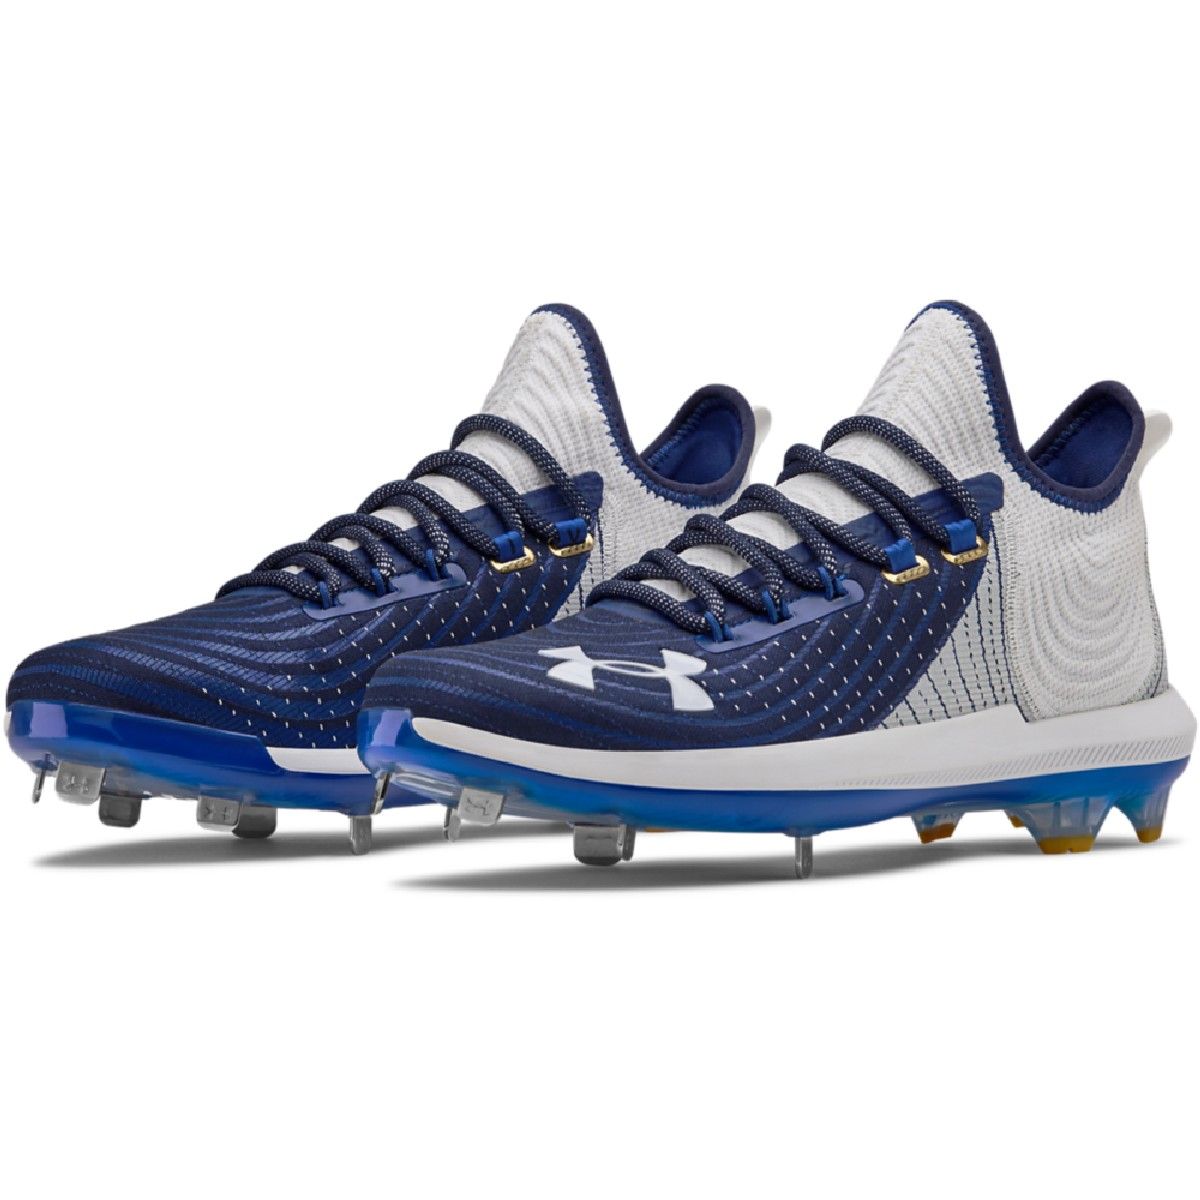 Under Armour Bryce Harper 4 Low Men's Metal Baseball Cleats (White/Royal) 15